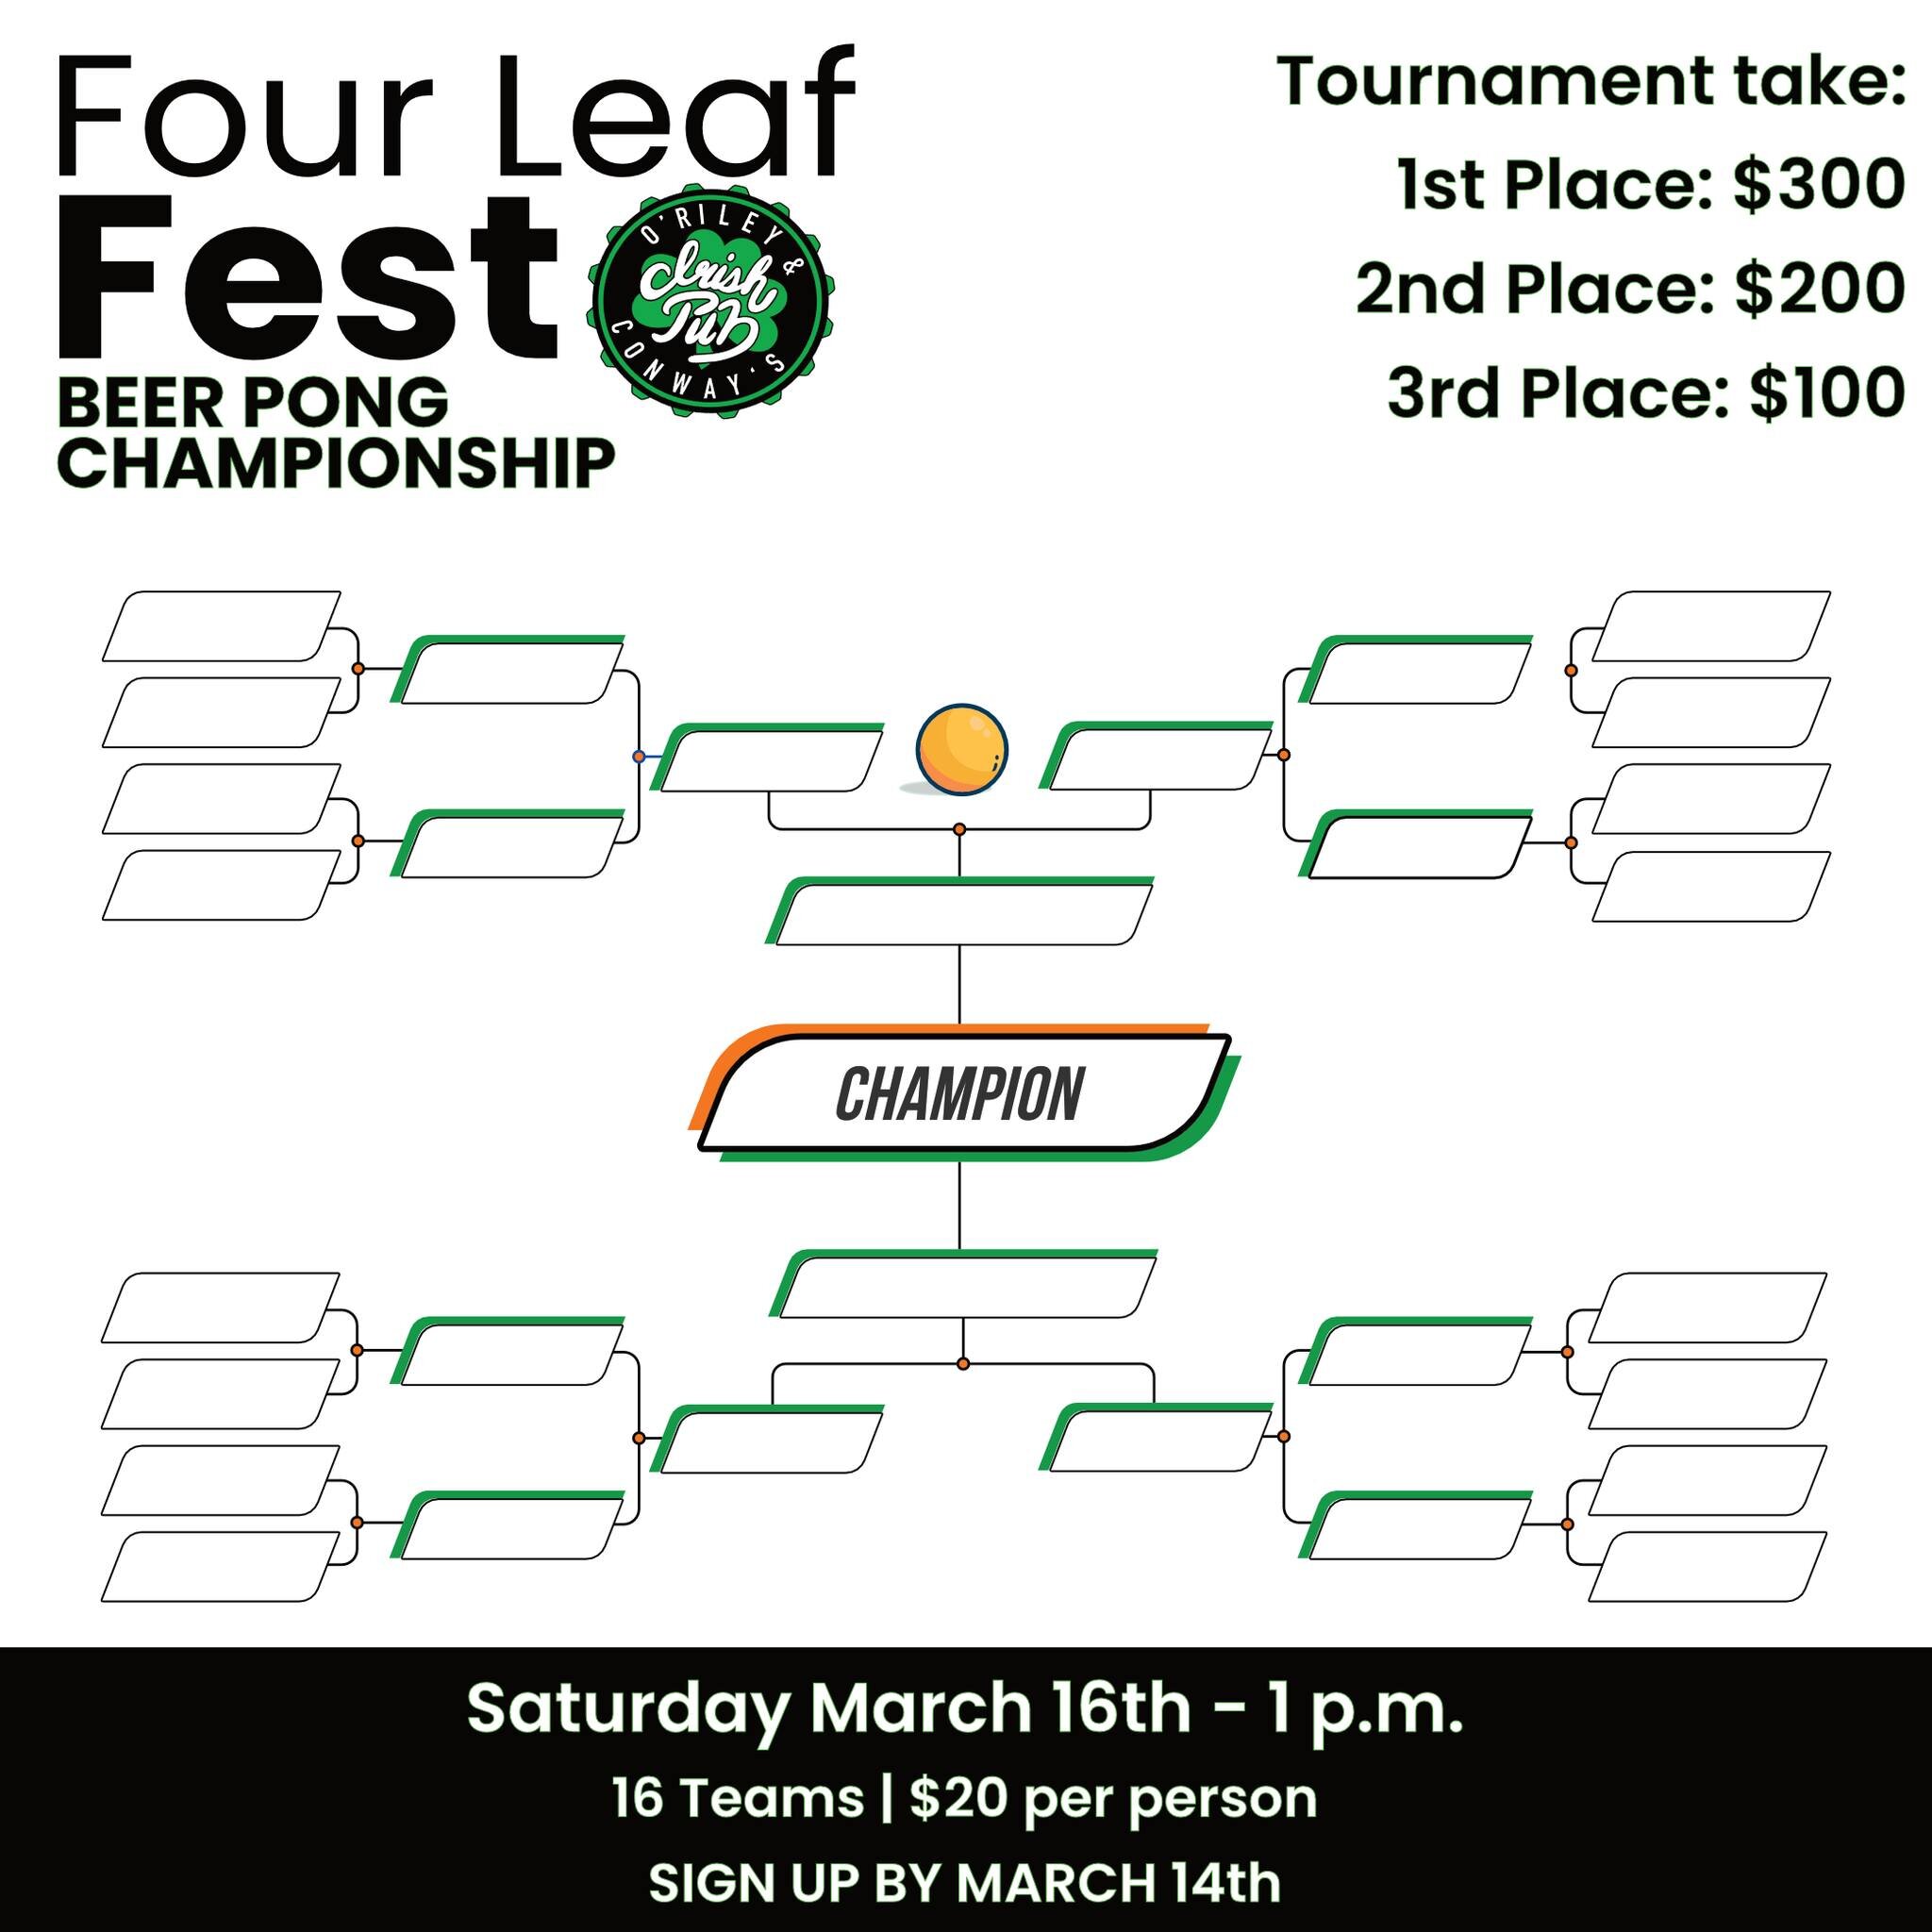 The Beer Pong Championship is officially on!☘️
Find a partner and drop in to the pub to sign up! 
👇
Buy in and team name due at sign up. 
A schedule will be posted as soon as the bracket is full!